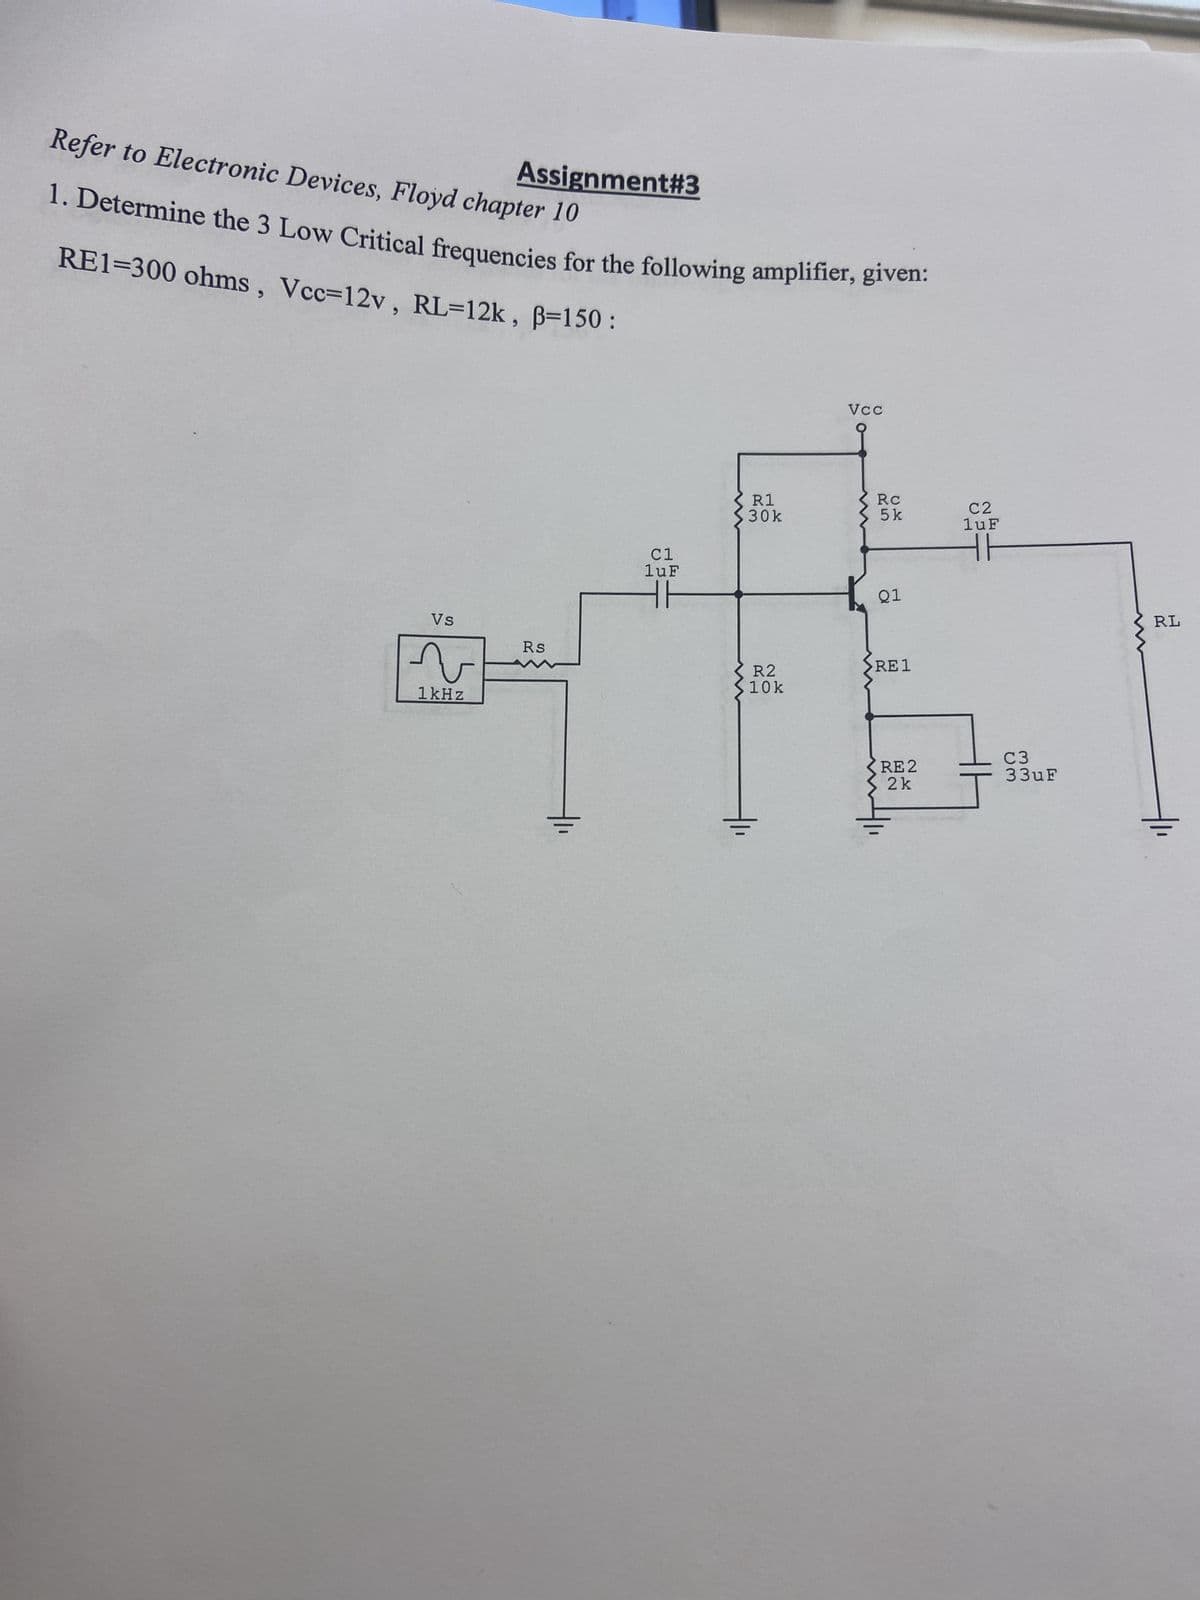 Assignment#3
Refer to Electronic Devices, Floyd chapter 10
1. Determine the 3 Low Critical frequencies for the following amplifier, given:
RE1-300 ohms, Vcc=12v, RL=12k, B=150:
Vs
v
1kHz
Rs
C1
luF
R1
30k
R2
10k
Vcc
Rc
5k
Q1
>RE1
RE 2
2 k
C2
1uF
C3
33uF
RL